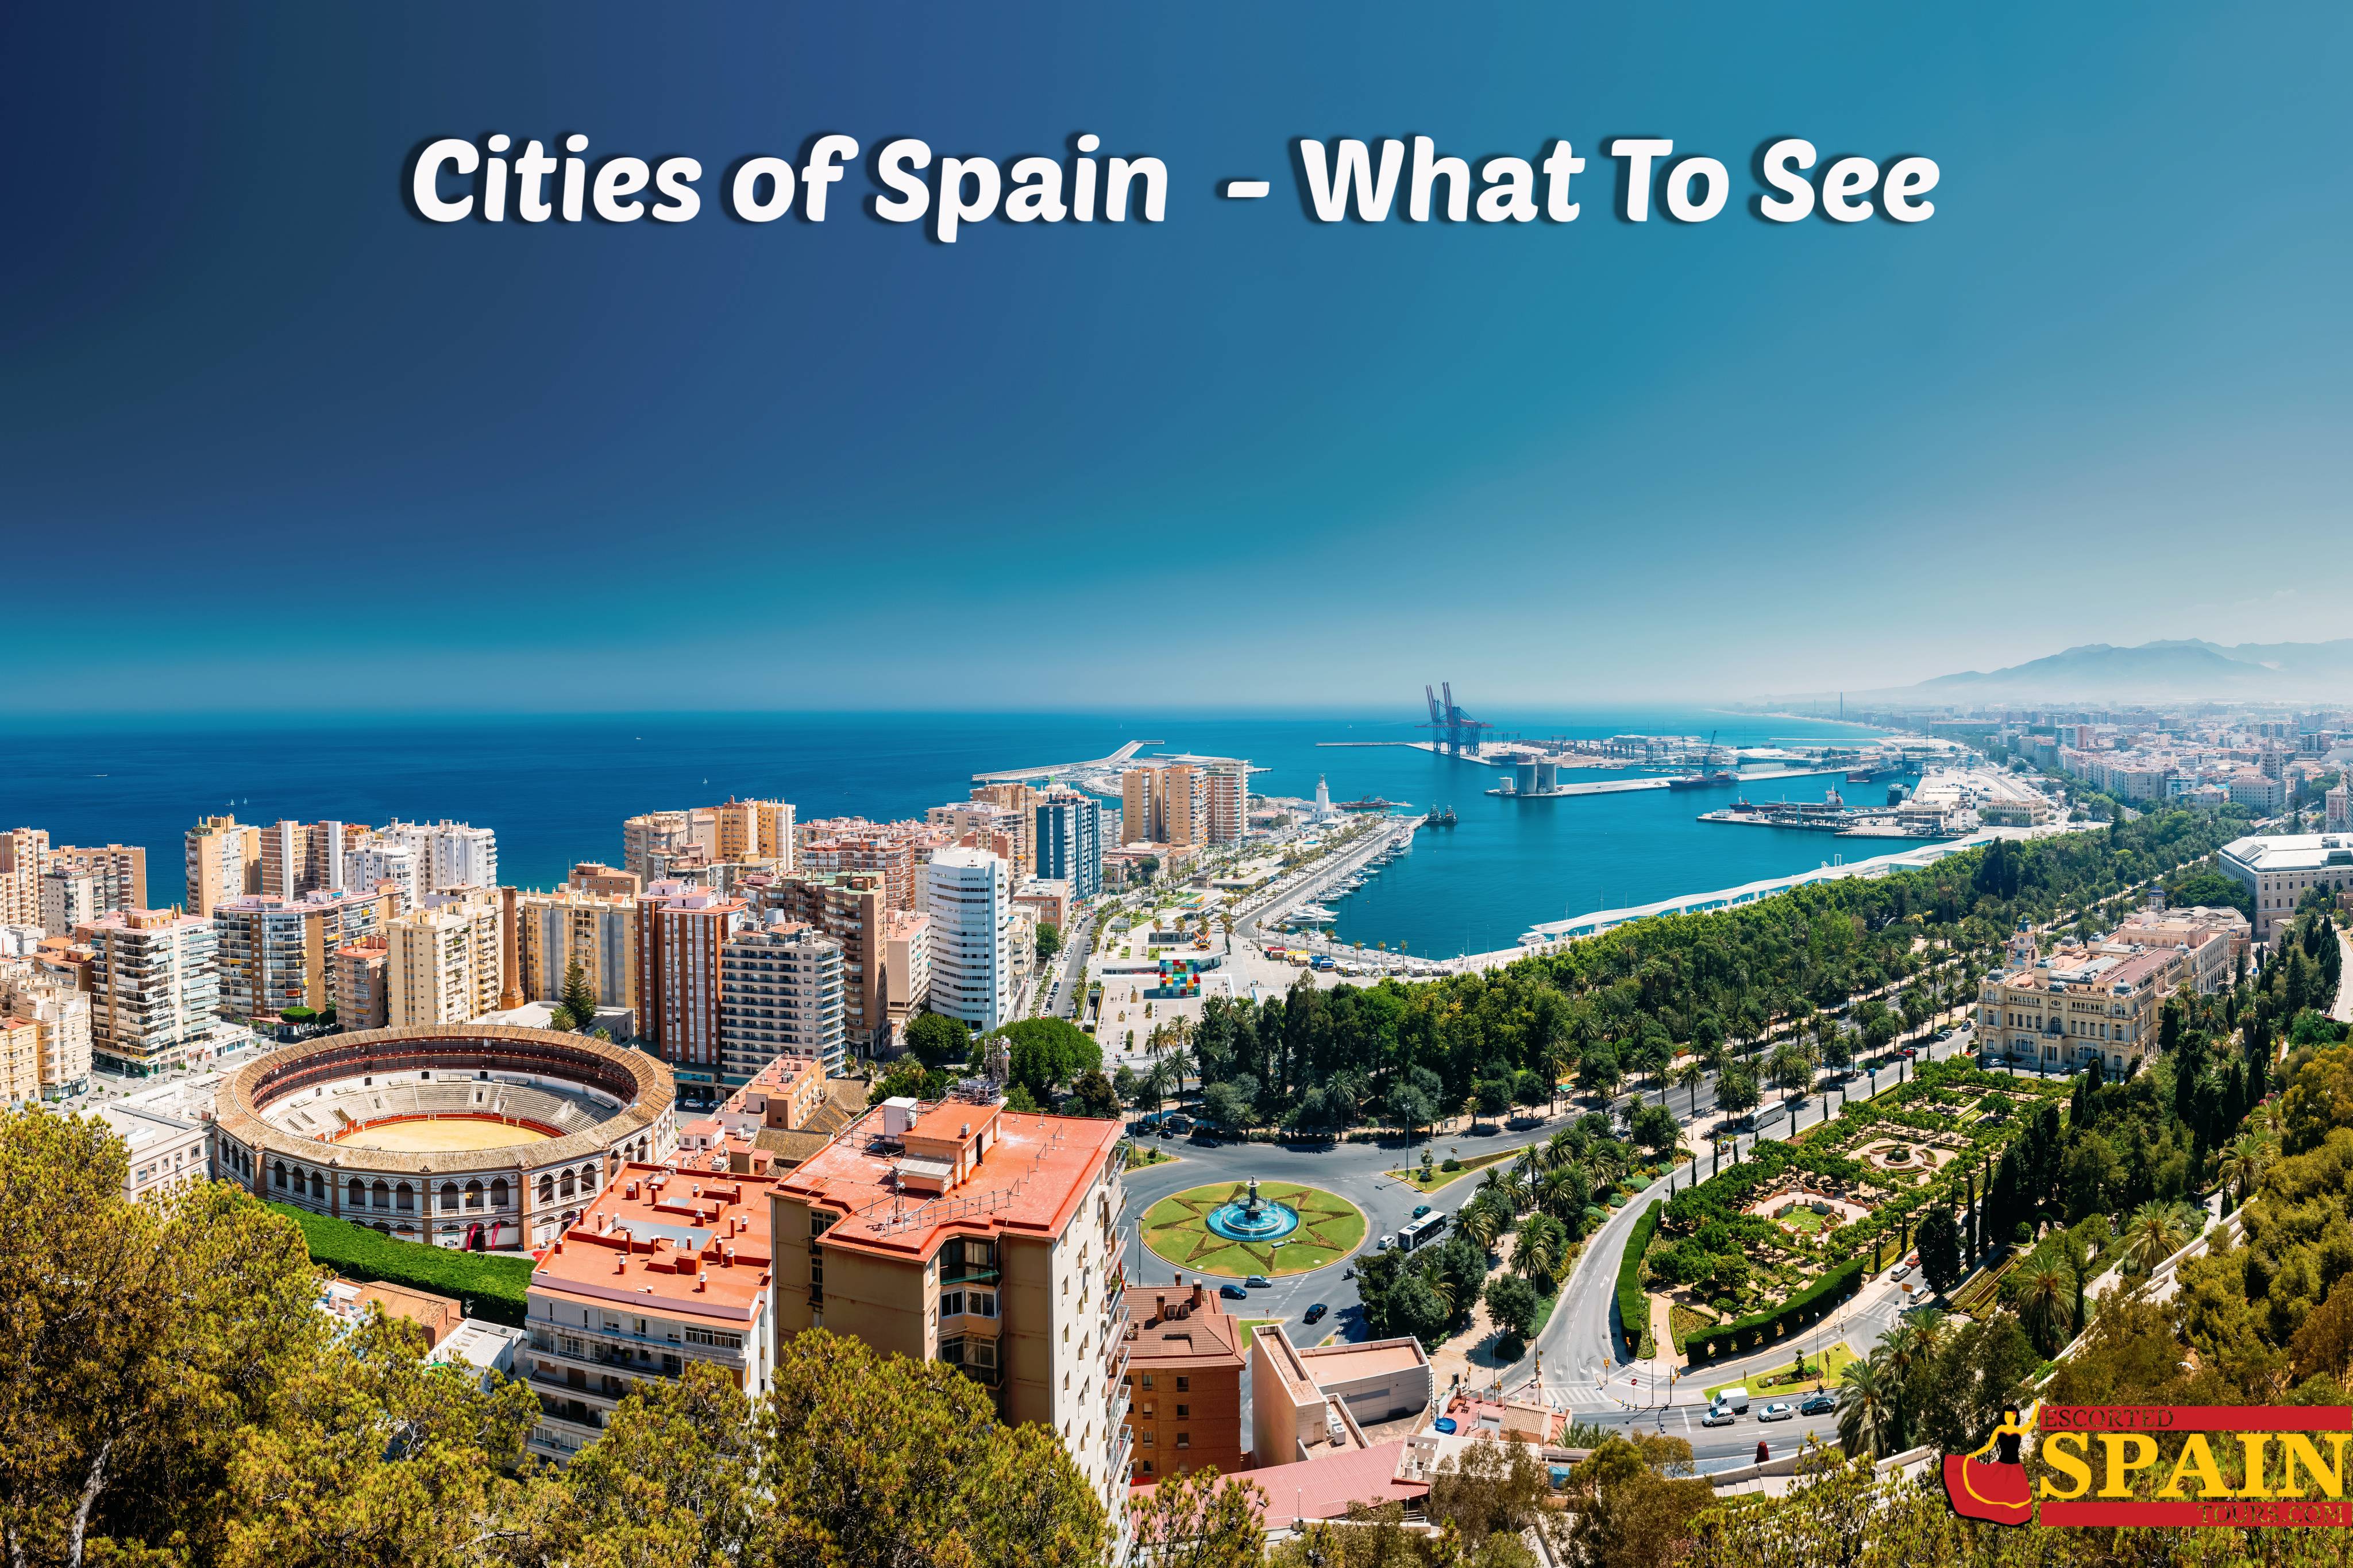 Most Popular Cities of Spain - What To See